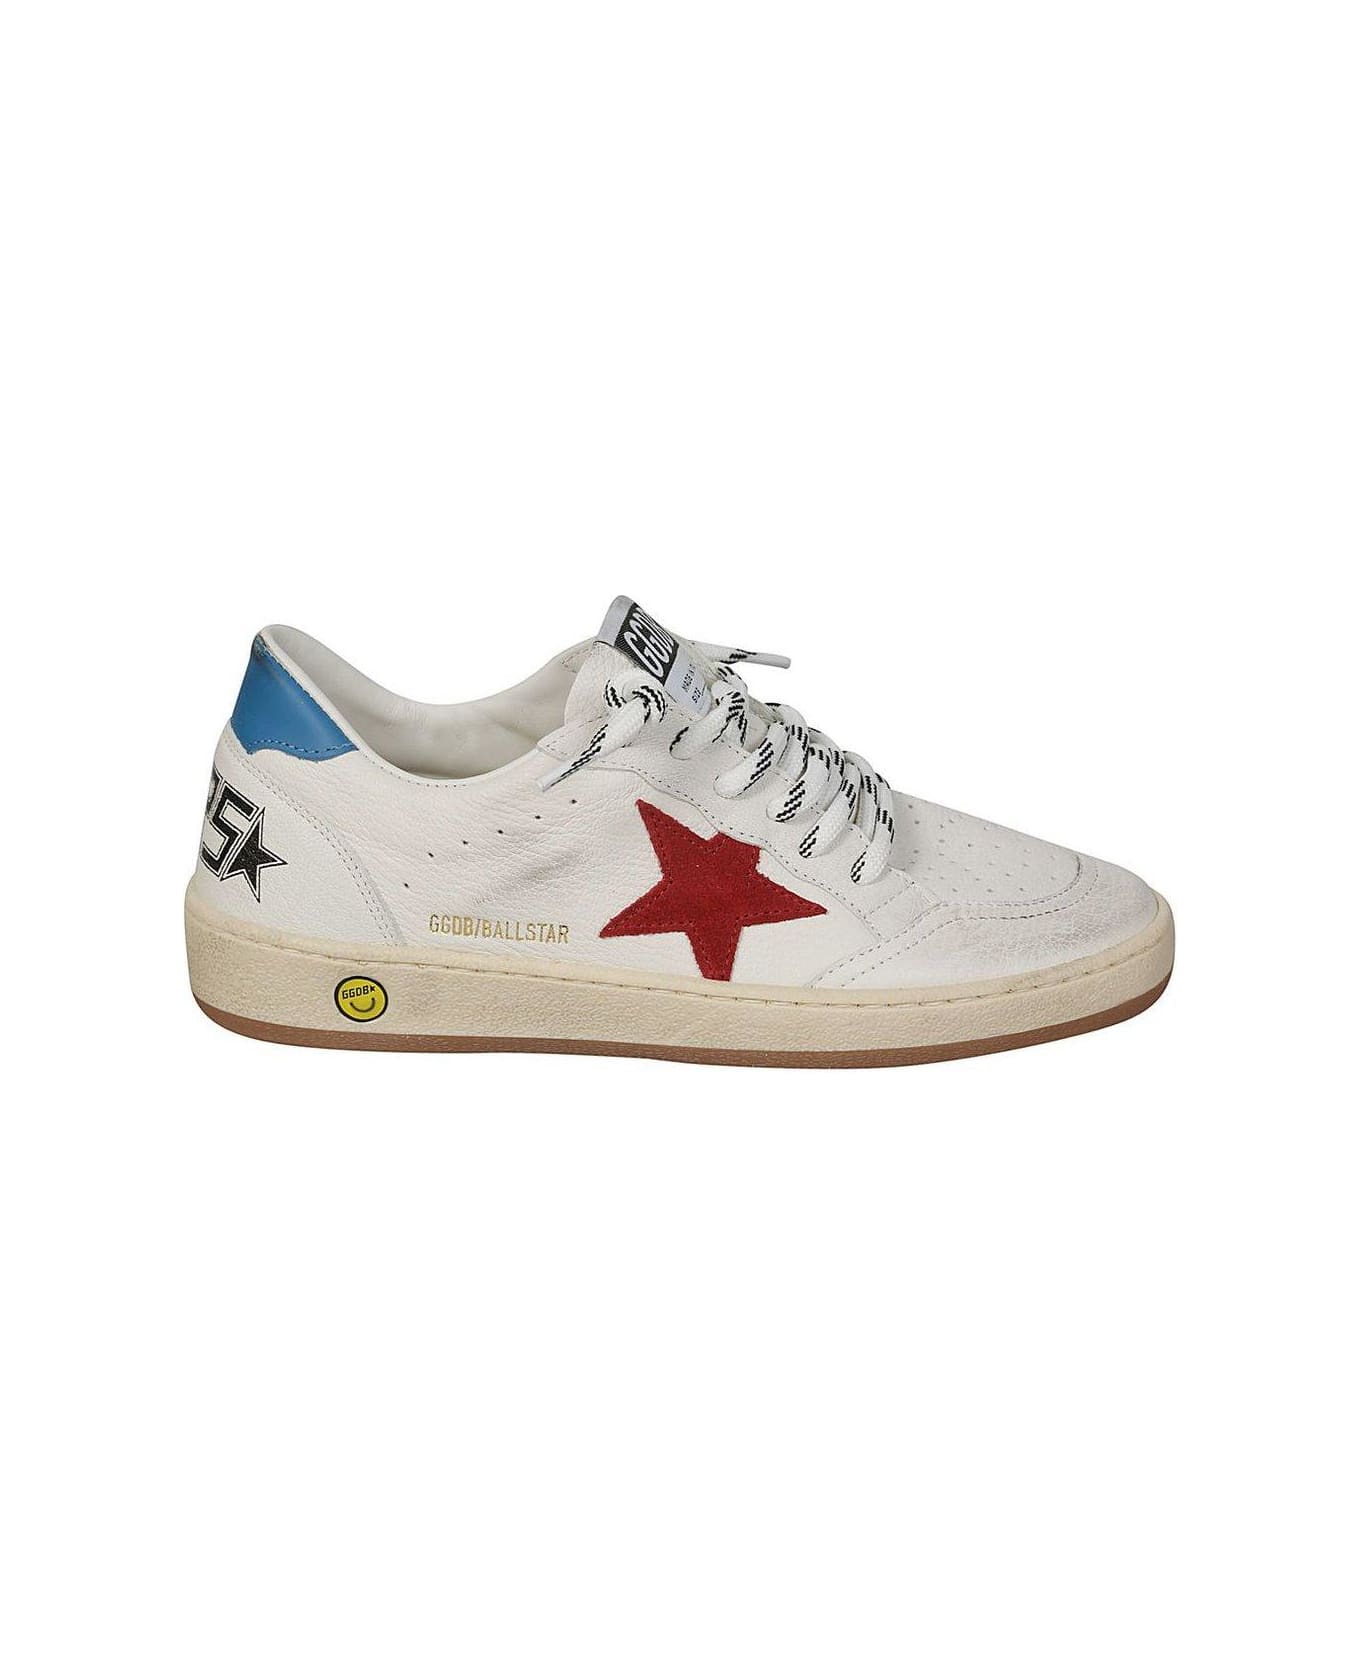 Golden Goose Ball Star-patch Lace-up Sneakers - White/Red/Blue シューズ